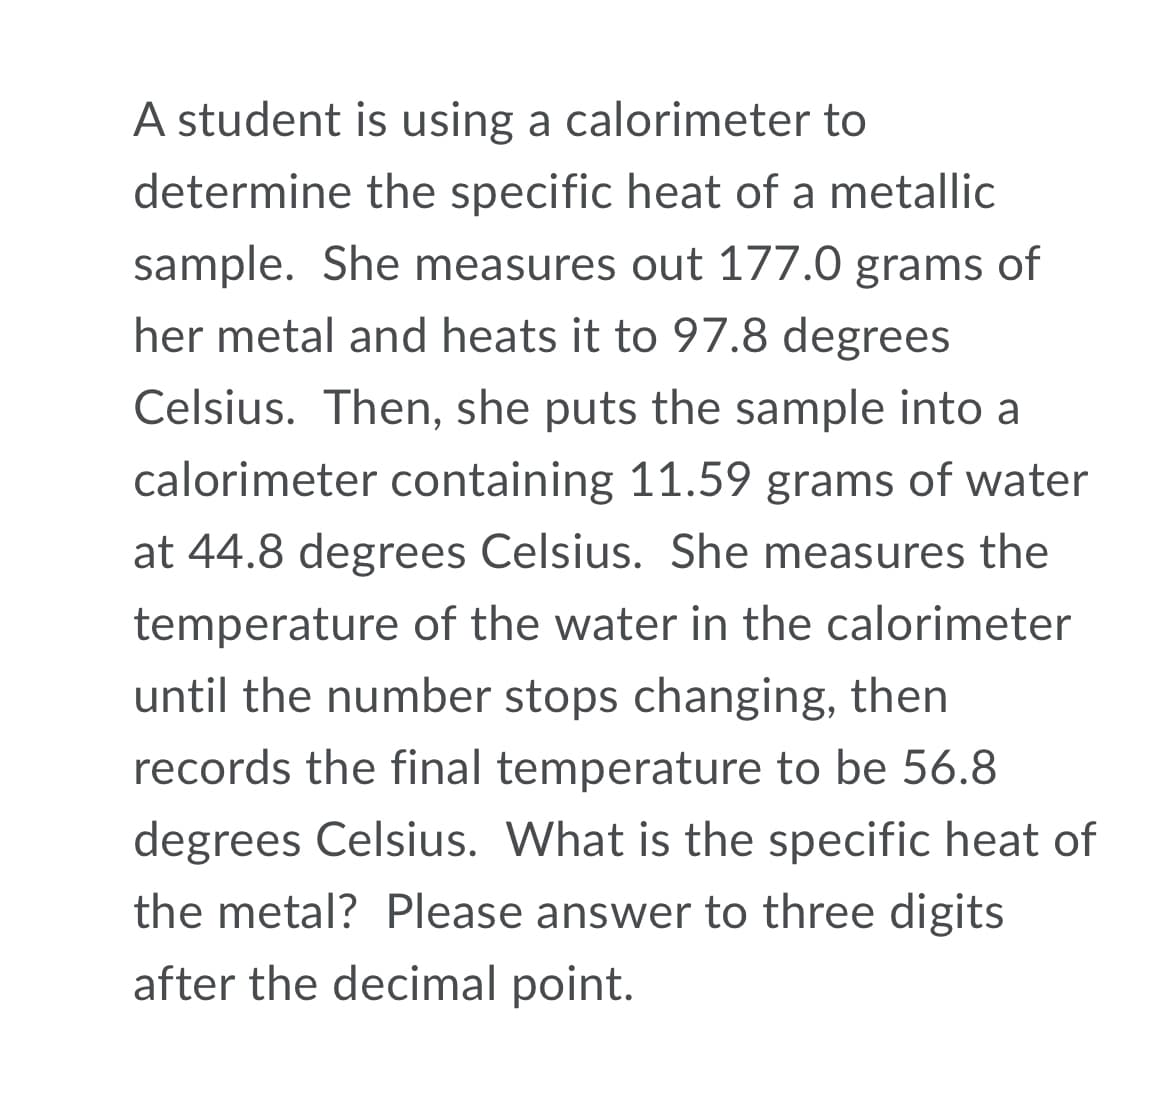 A student is using a calorimeter to
determine the specific heat of a metallic
sample. She measures out 177.0 grams of
her metal and heats it to 97.8 degrees
Celsius. Then, she puts the sample into a
calorimeter containing 11.59 grams of water
at 44.8 degrees Celsius. She measures the
temperature of the water in the calorimeter
until the number stops changing, then
records the final temperature to be 56.8
degrees Celsius. What is the specific heat of
the metal? Please answer to three digits
after the decimal point.
